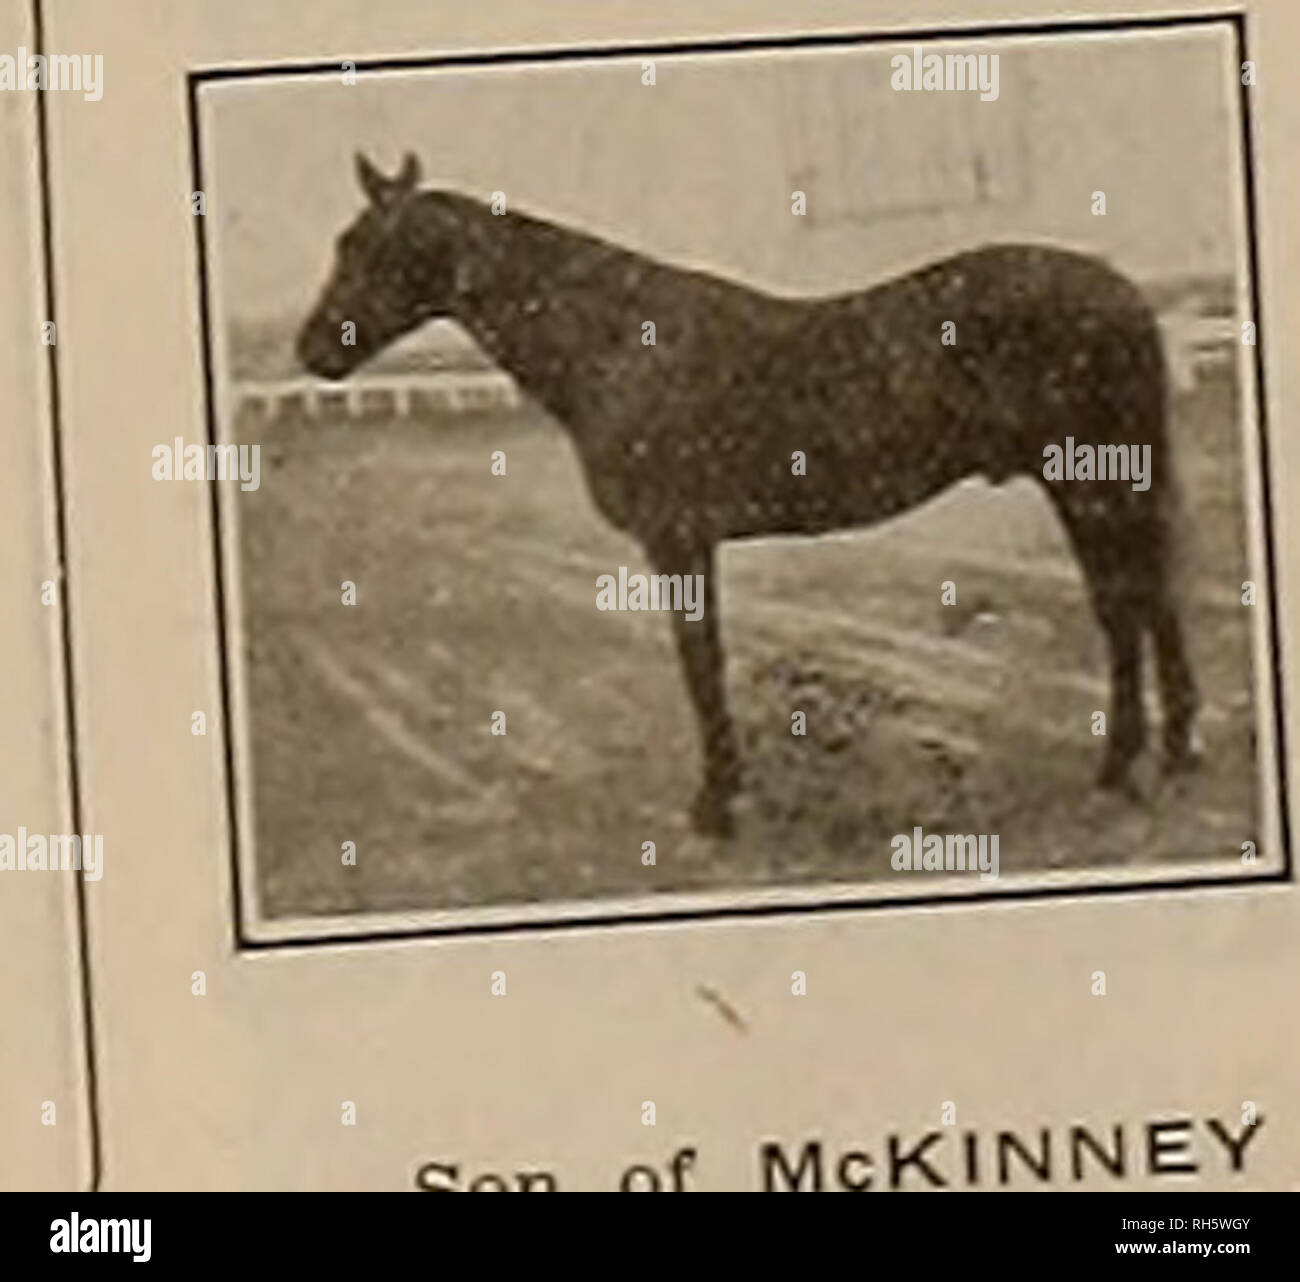 . Breeder and sportsman. Horses. his inbOUIUSe^; 'â &quot;4   nAPHNE McKINNEY prsl bv Guy WilK.es i-iJ7i. exeat individual, ^lul f&quot; t-tMrtilv rising young sire, Bav horse, in every respect a g;eai getter a a steadily ^ s c age G^od pasturage at $2.50 per month. For ^ ^^ ^^ ^ ' âno oresent day champions of all ages ââ .â 5-OSii foremost among present; uÂ«, From the family of Bingen 2.06,4, ^ s  ^am Tva Dee by Onward 2:25*), sire of ââât o-113i (by Bingen, dam Iva &quot;Â«Â»' two-year-olds and Son of The Exponent 2.1 WJ ^^ G three.year-olds, 20 two 32 performers including The lemv *lSriT-&q Stock Photo